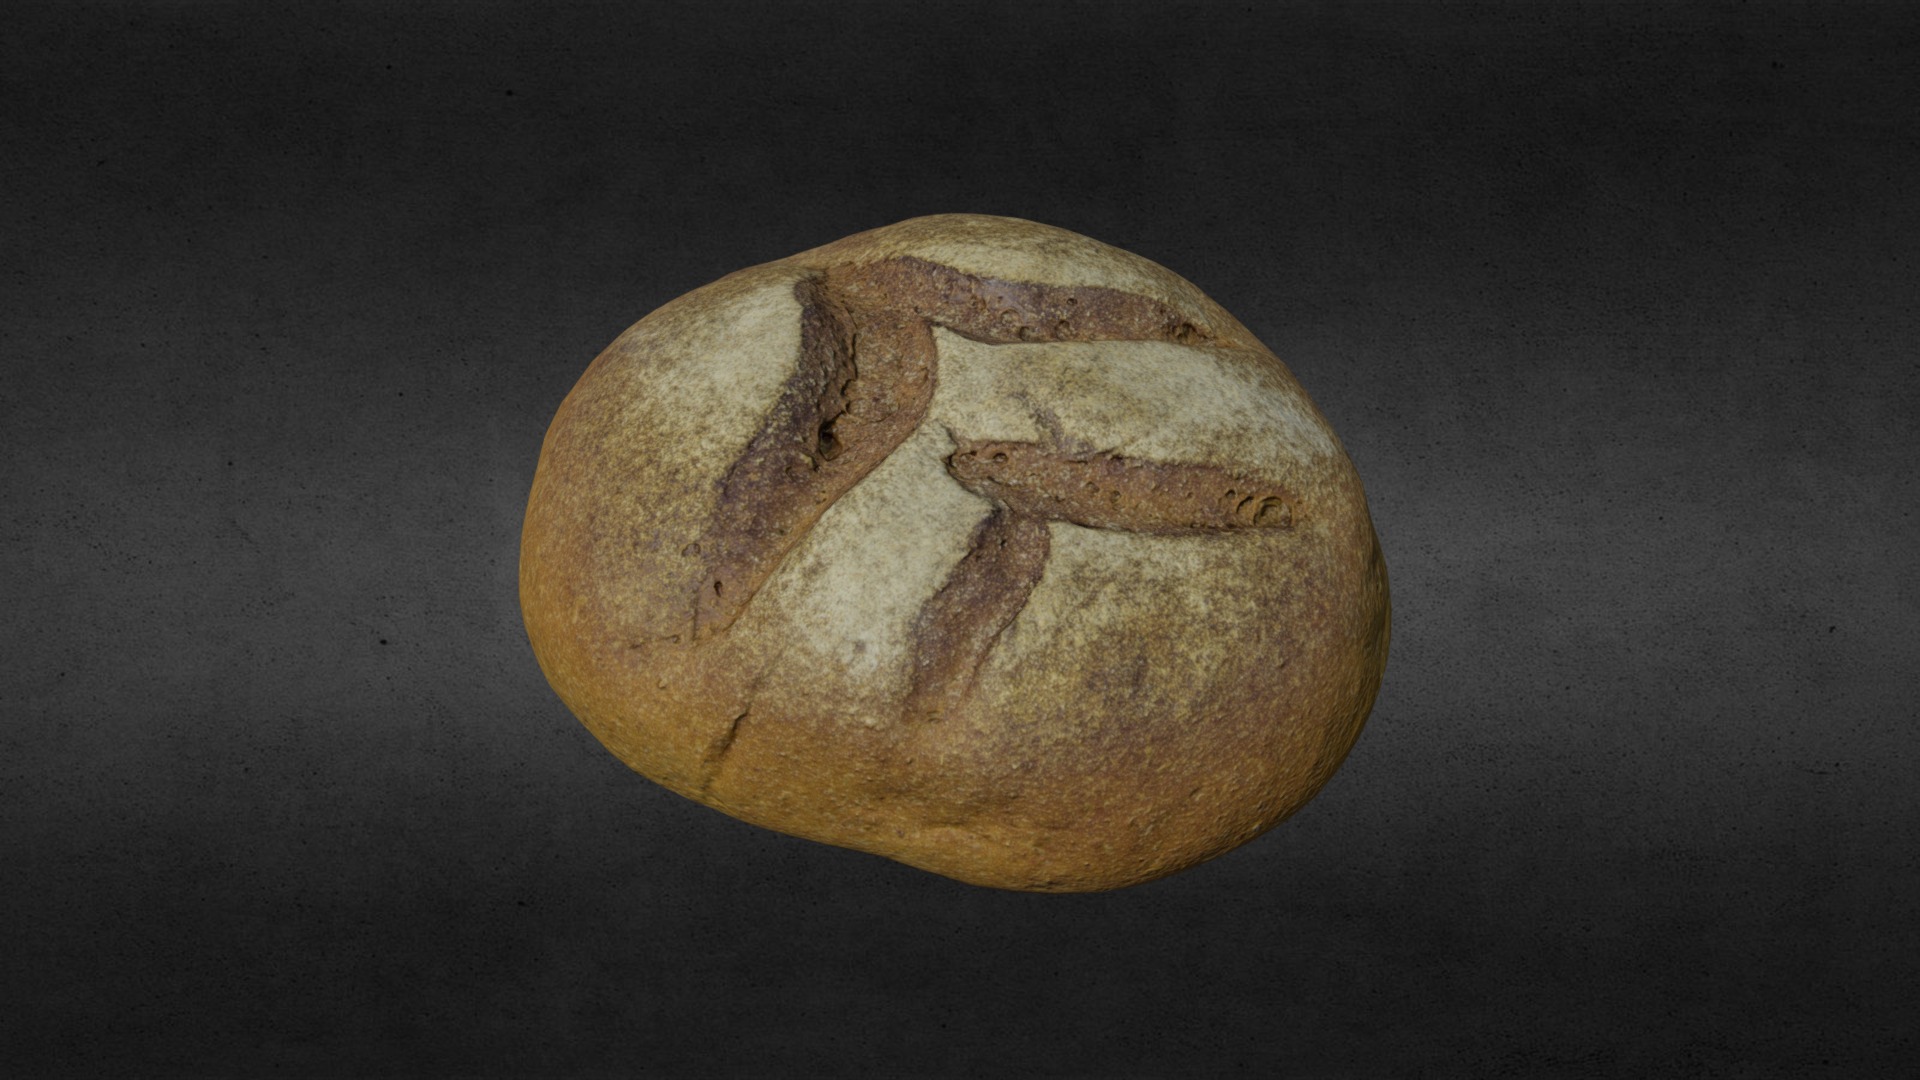 3D model Bread 01 - This is a 3D model of the Bread 01. The 3D model is about a potato with a face drawn on it.